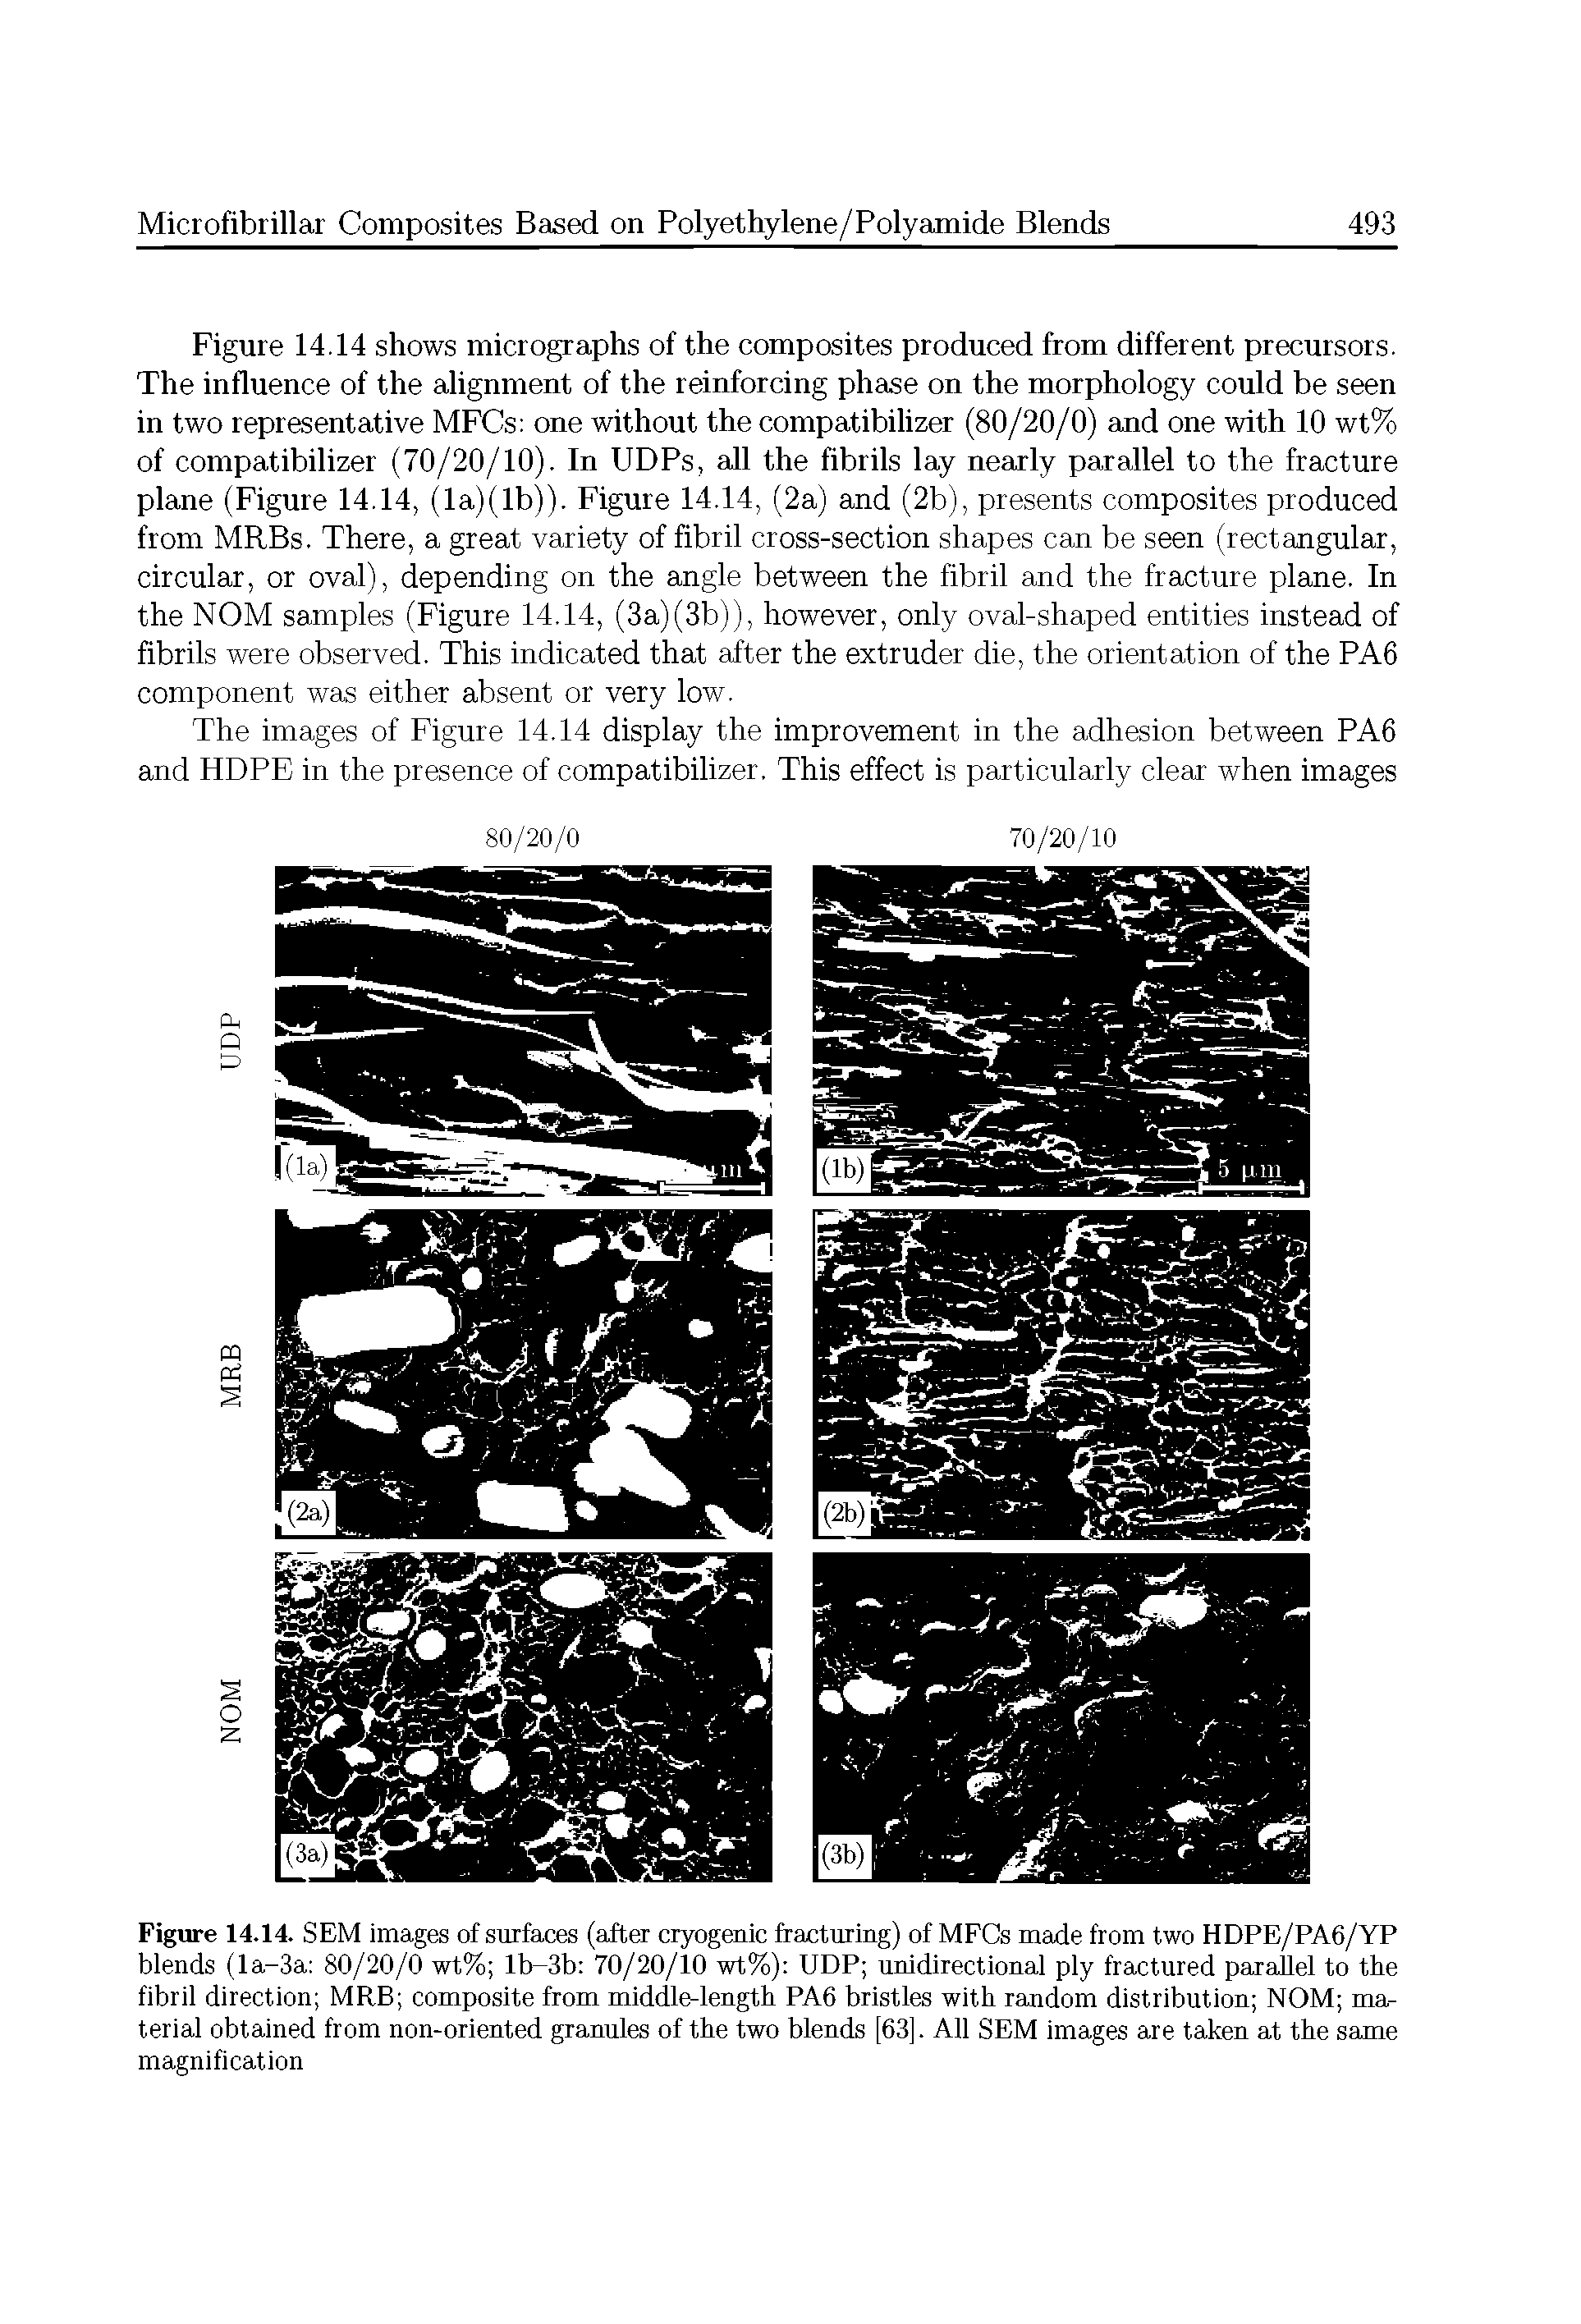 Figure 14.14. SEM images of surfaces (after cryogenic fracturing) of MFCs made from two HDPE/PA6/YP blends (la-3a 80/20/0 wt% lb-3b 70/20/10 wt%) UDP unidirectional ply fractured parallel to the fibril direction MRB composite from middle-length PA6 bristles with random distribution NOM material obtained from non-oriented granules of the two blends [63]. All SEM images are taken at the same magnification...